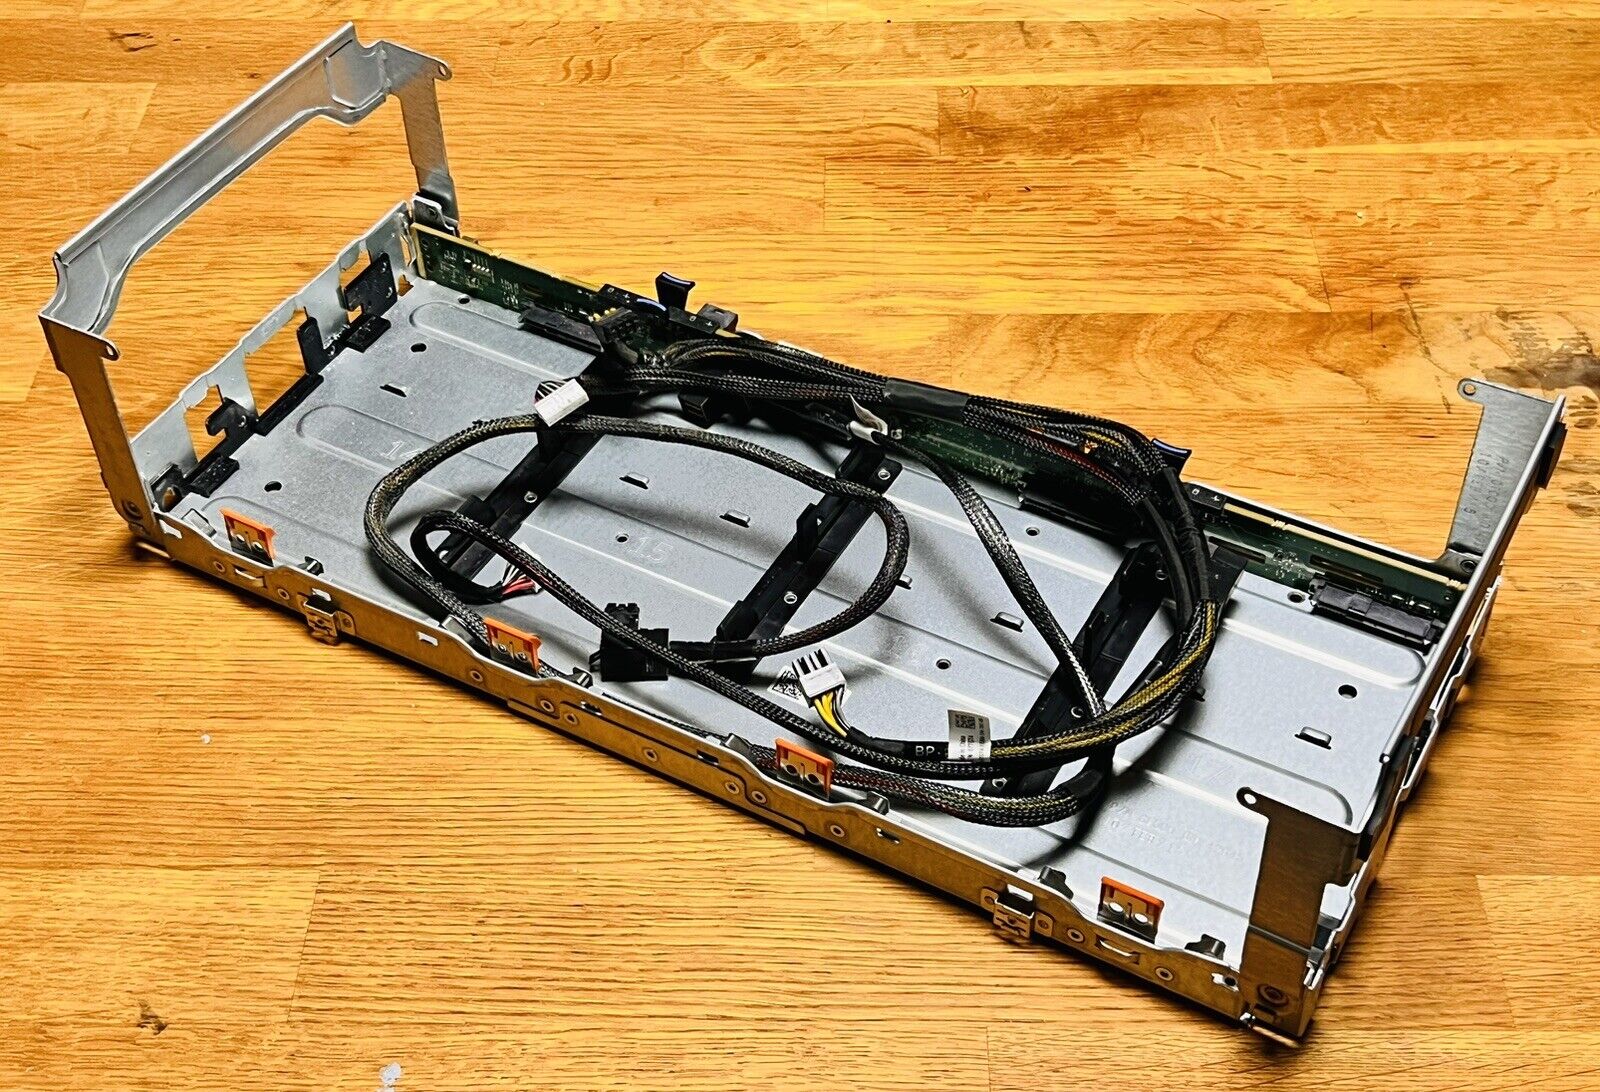 Dell 04FHR4 4FHR4 R730xd Midplane + 4x3.5” Backplane + LFF Cables 0NF4JP/7TGT4